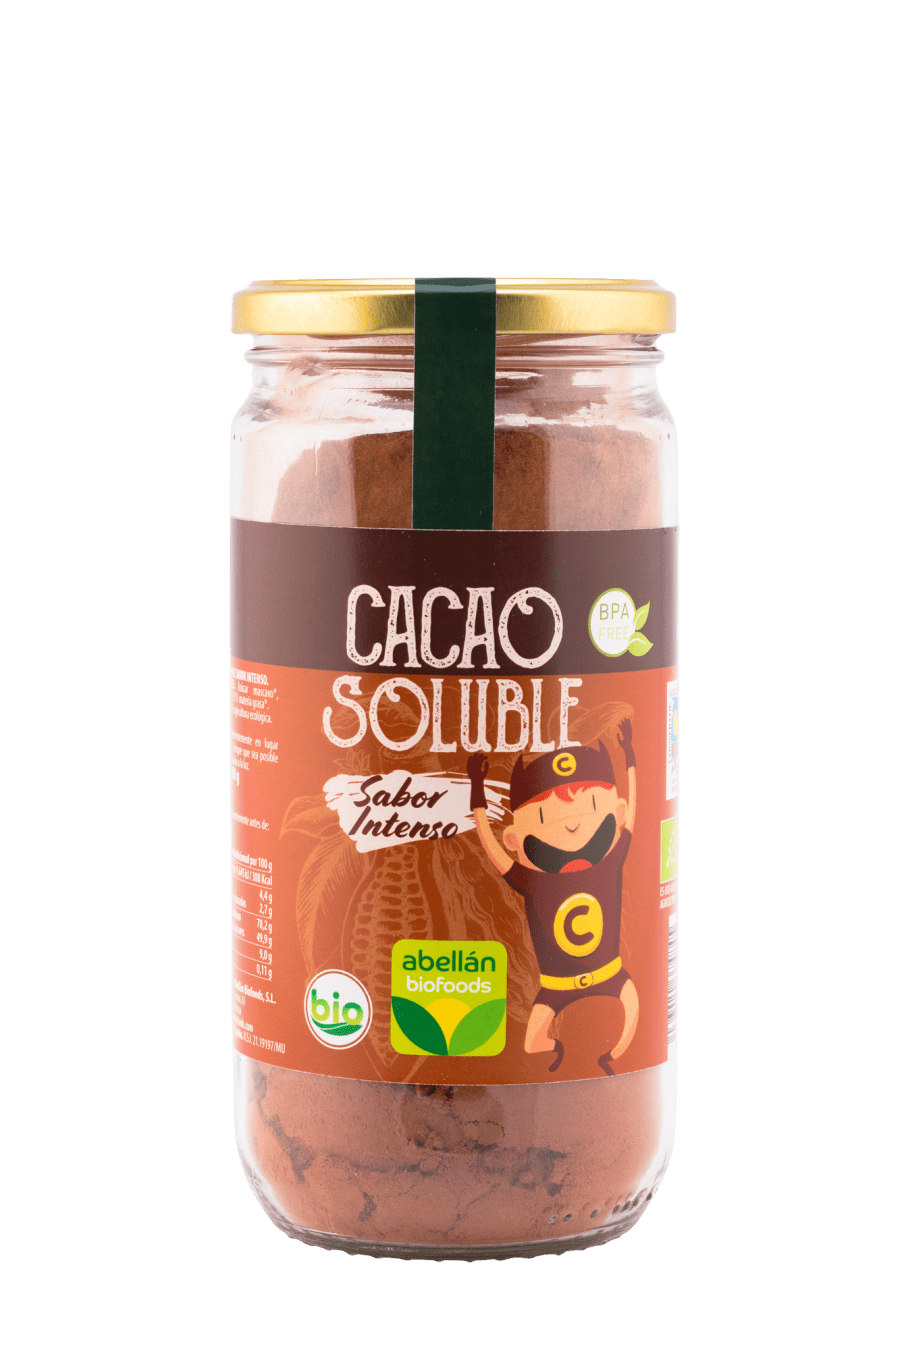 Cacao soluble sabor intenso